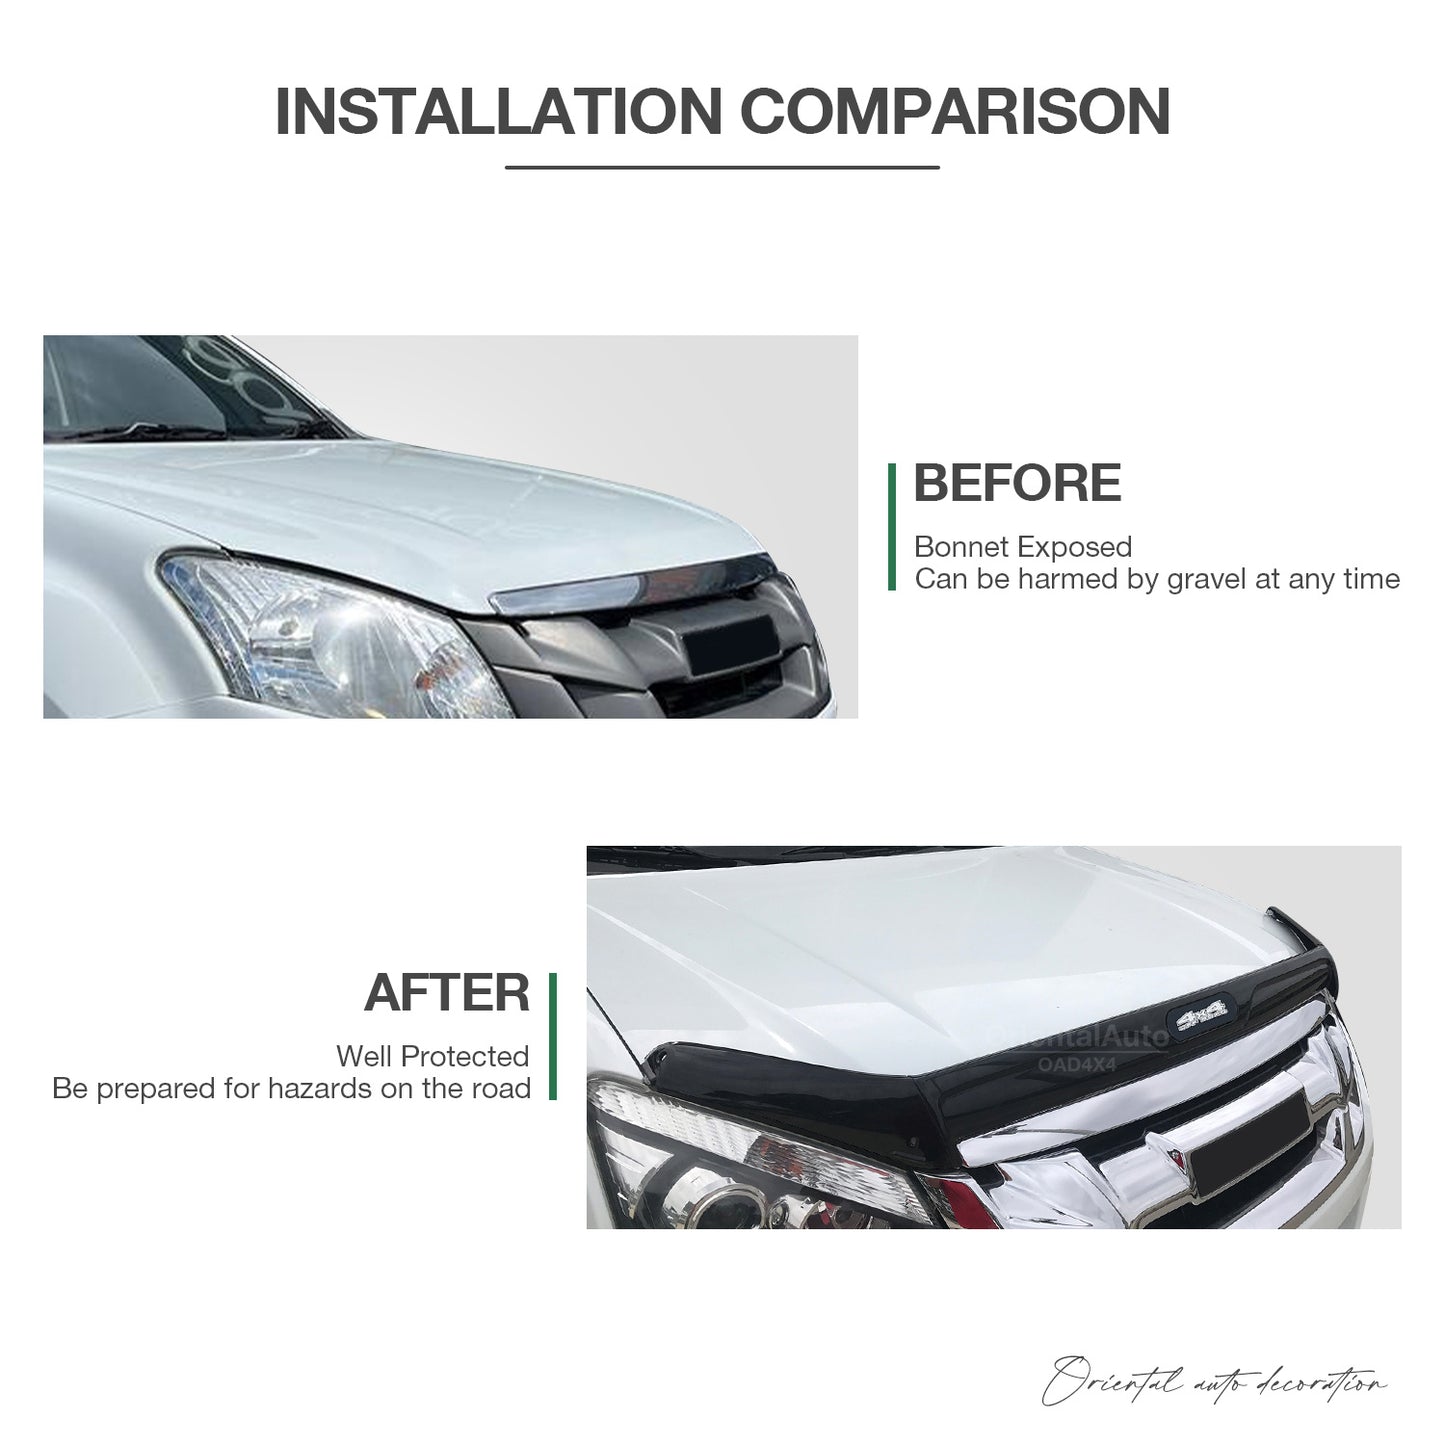 Injection Modeling Exclusive Bonnet Protector for ISUZU DMAX/D-MAX 2012-2016 Hood Protector Bonnet Guard